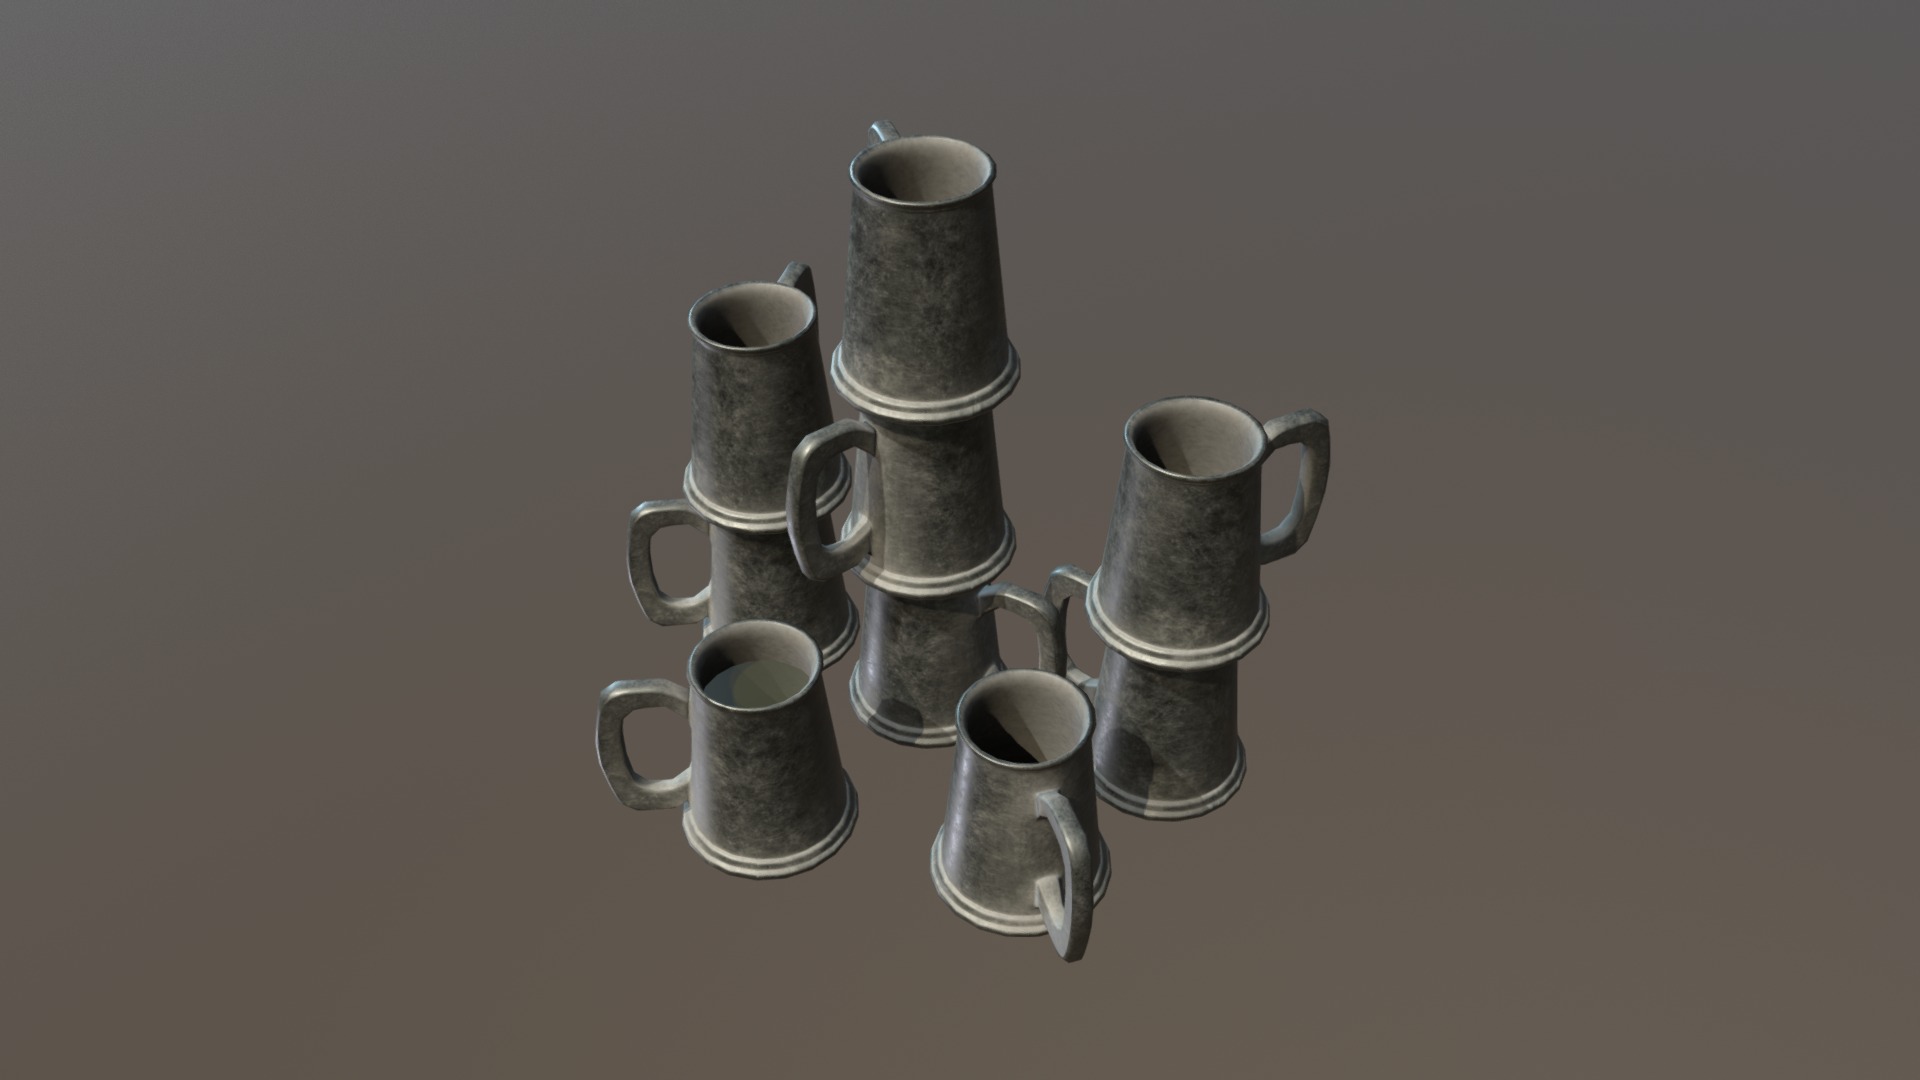 3D model Old Stein - This is a 3D model of the Old Stein. The 3D model is about a group of silver and black chess pieces.